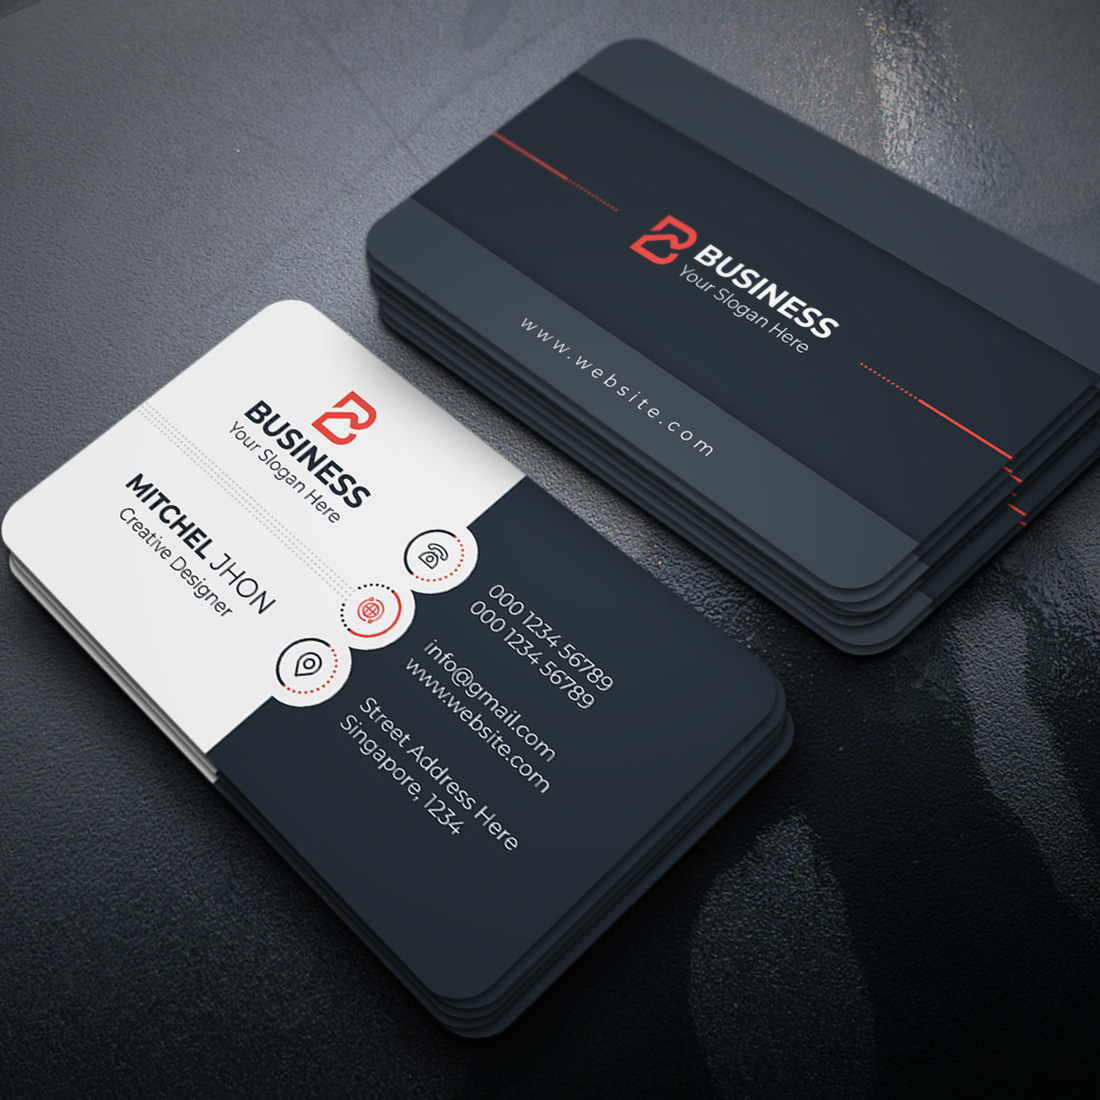 Business Card Template Only $6 cover image.